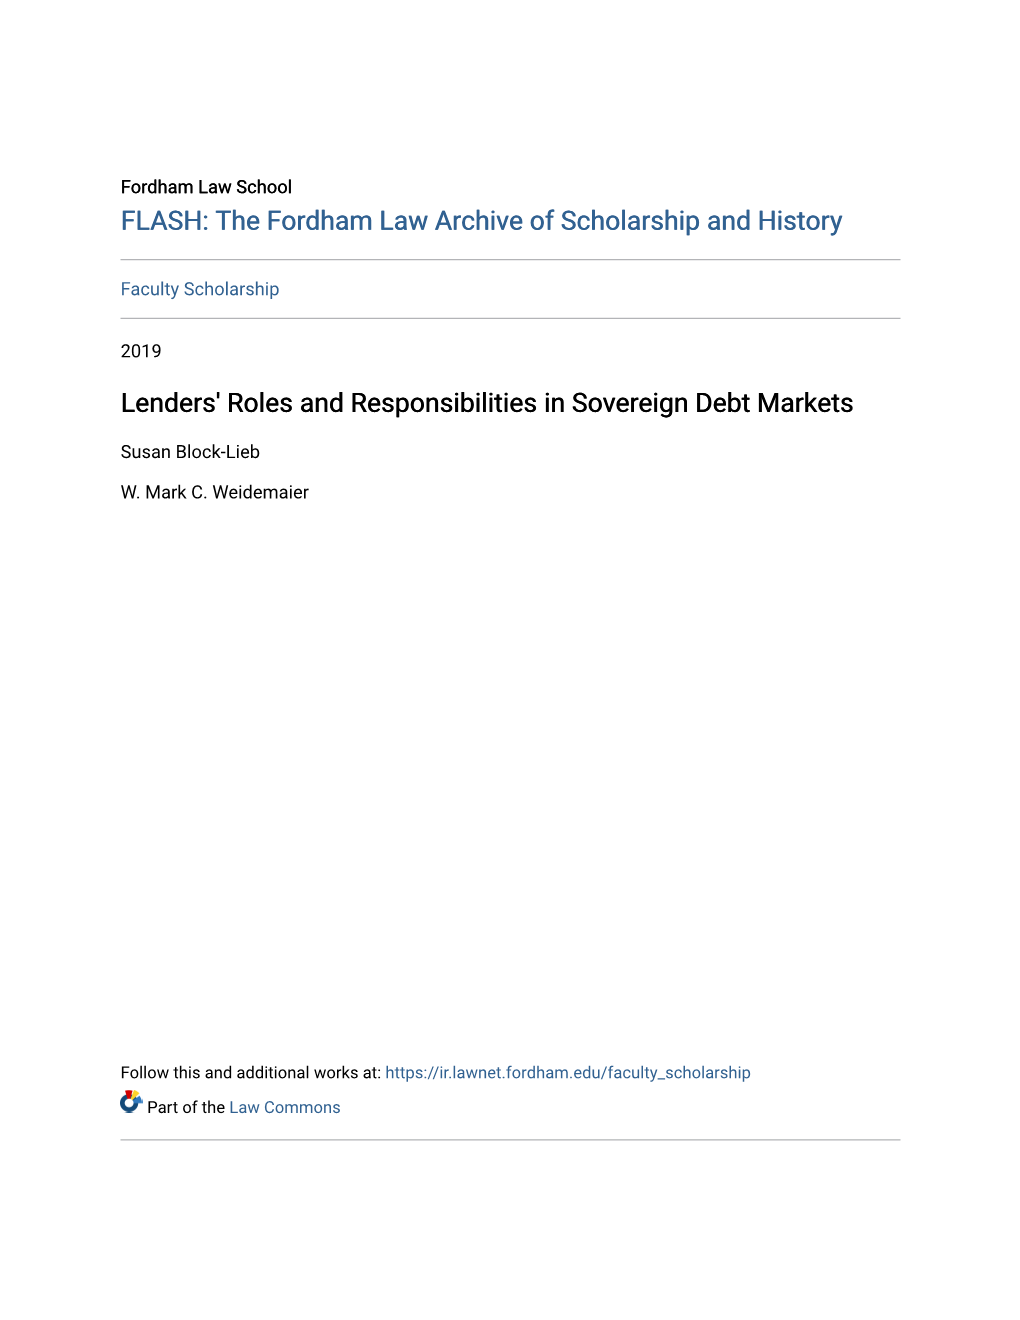 Lenders' Roles and Responsibilities in Sovereign Debt Markets